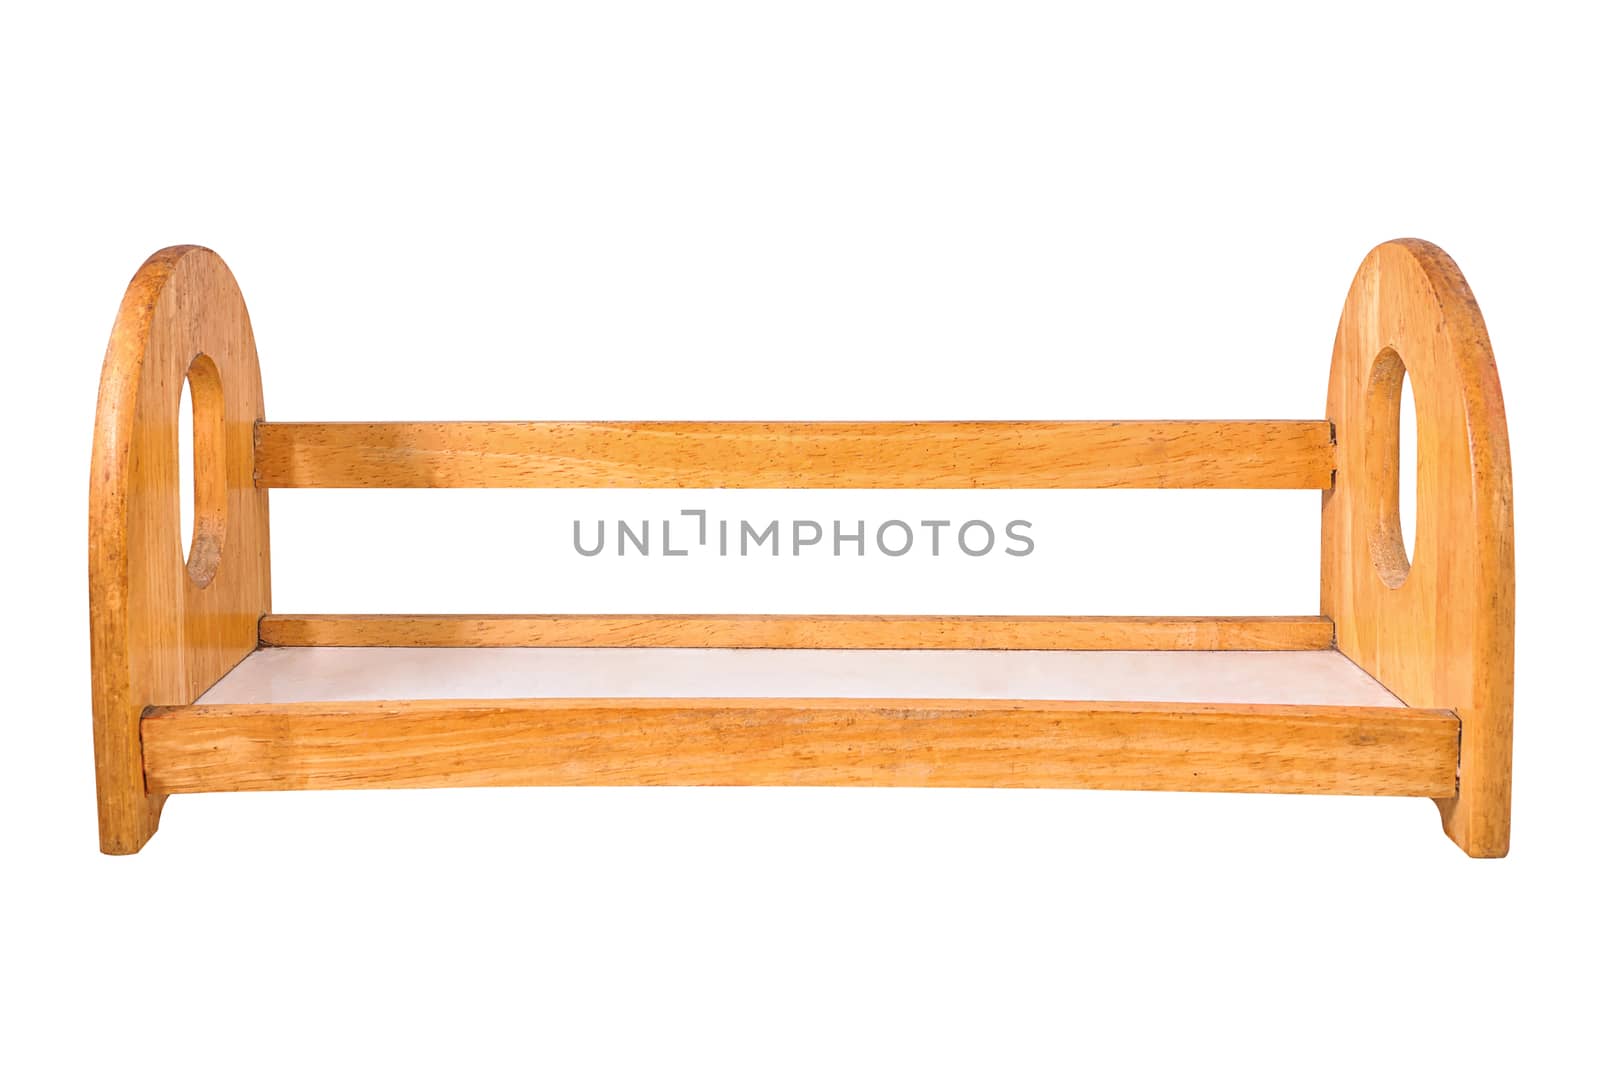 Wooden rack isolated on white background with clipping path